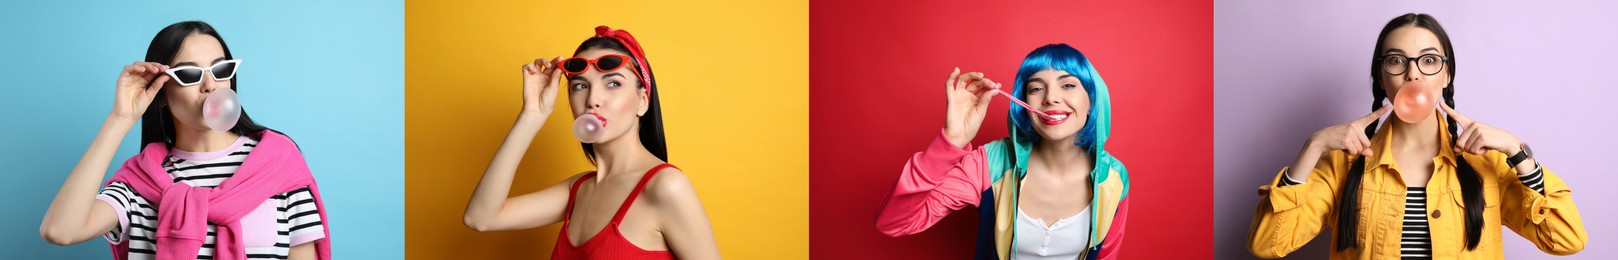 Collage with photos of woman with bubblegum on color backgrounds, banner design